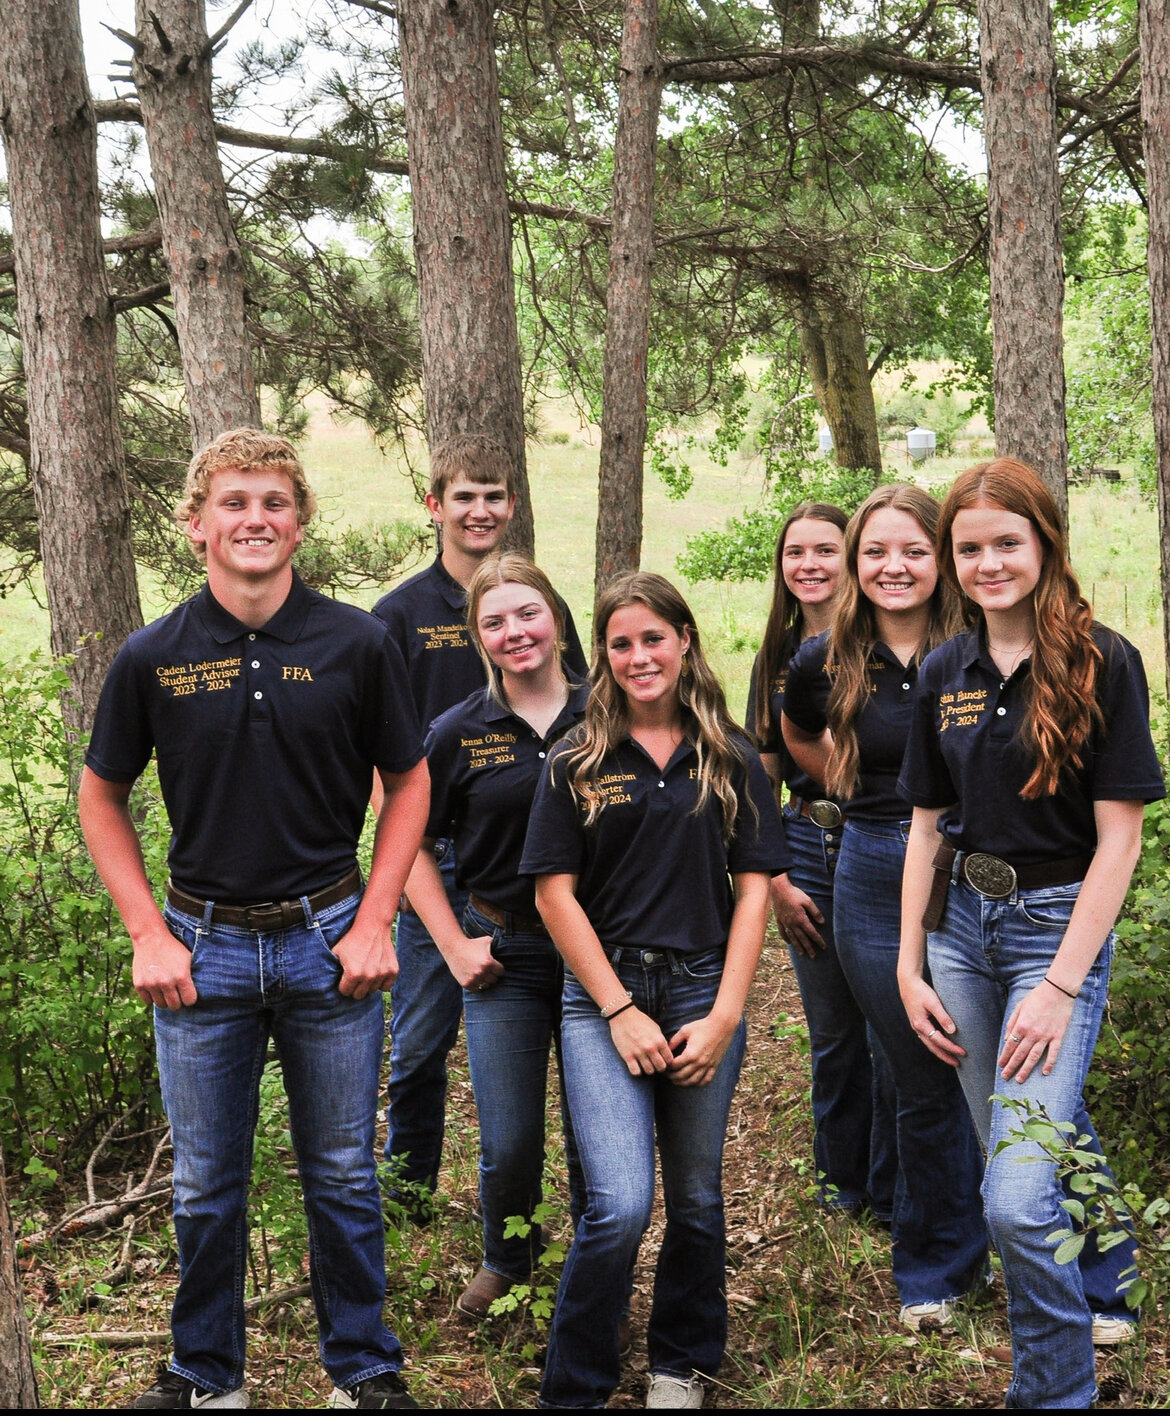 The Goodhue FFA Officers pictured left to right is Caden Lodermeier, Nolan Mandelkow, Jenna O´Reilly, Ciara Callstrom, Jaclyn Jenson, Alyssa Luhman, and Sophie Huneke